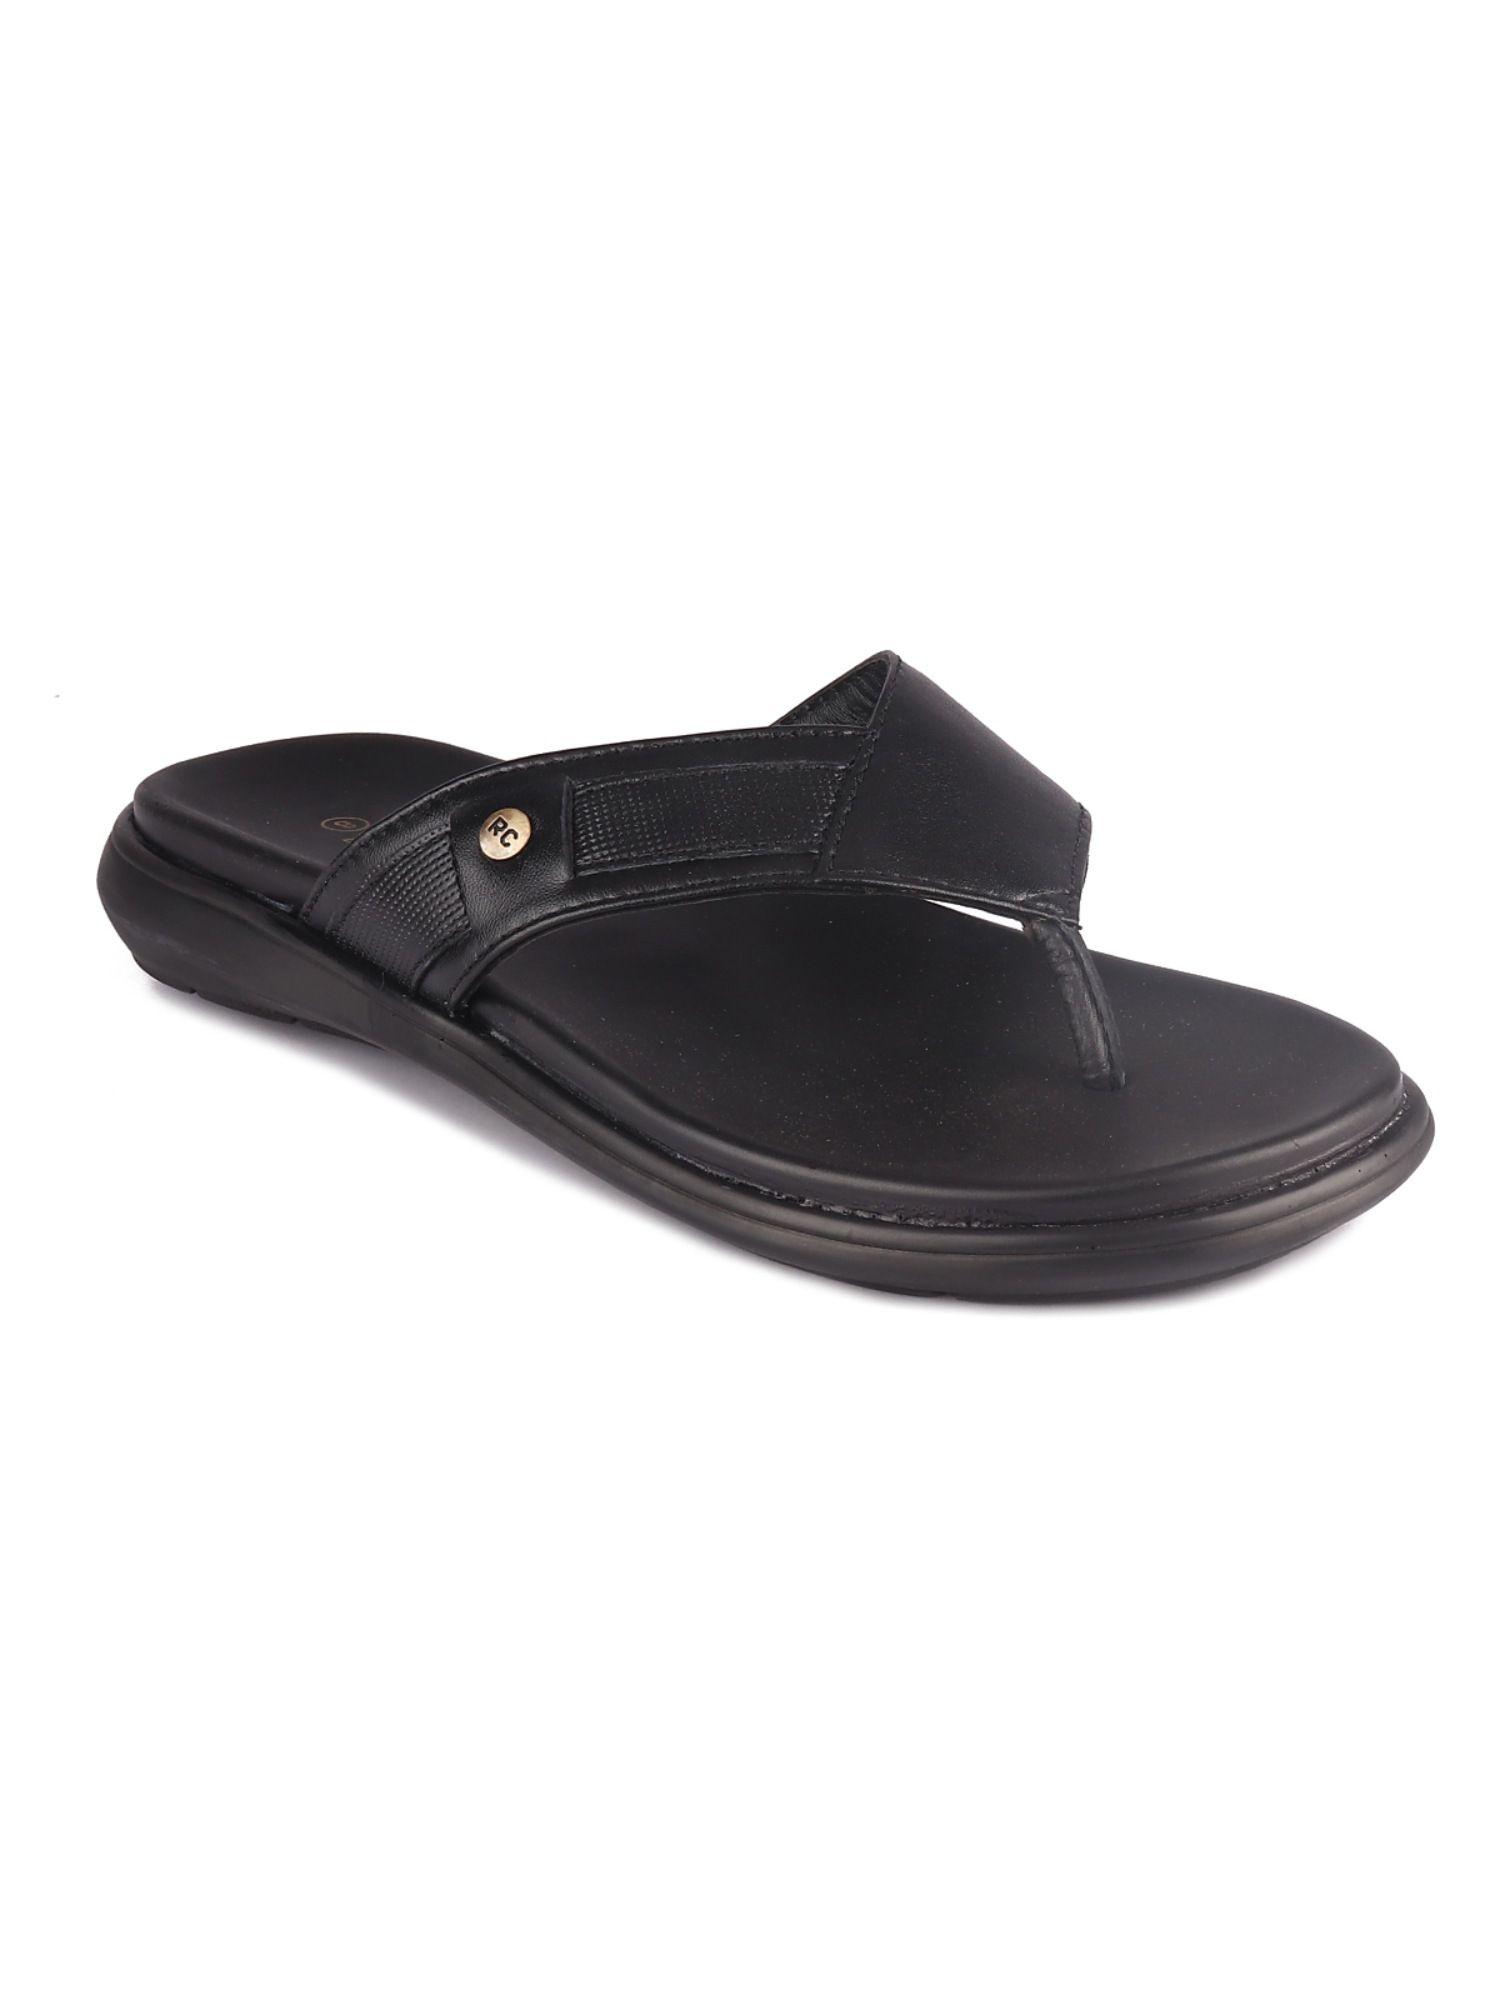 black-leather-casual-solid-slipper-for-men